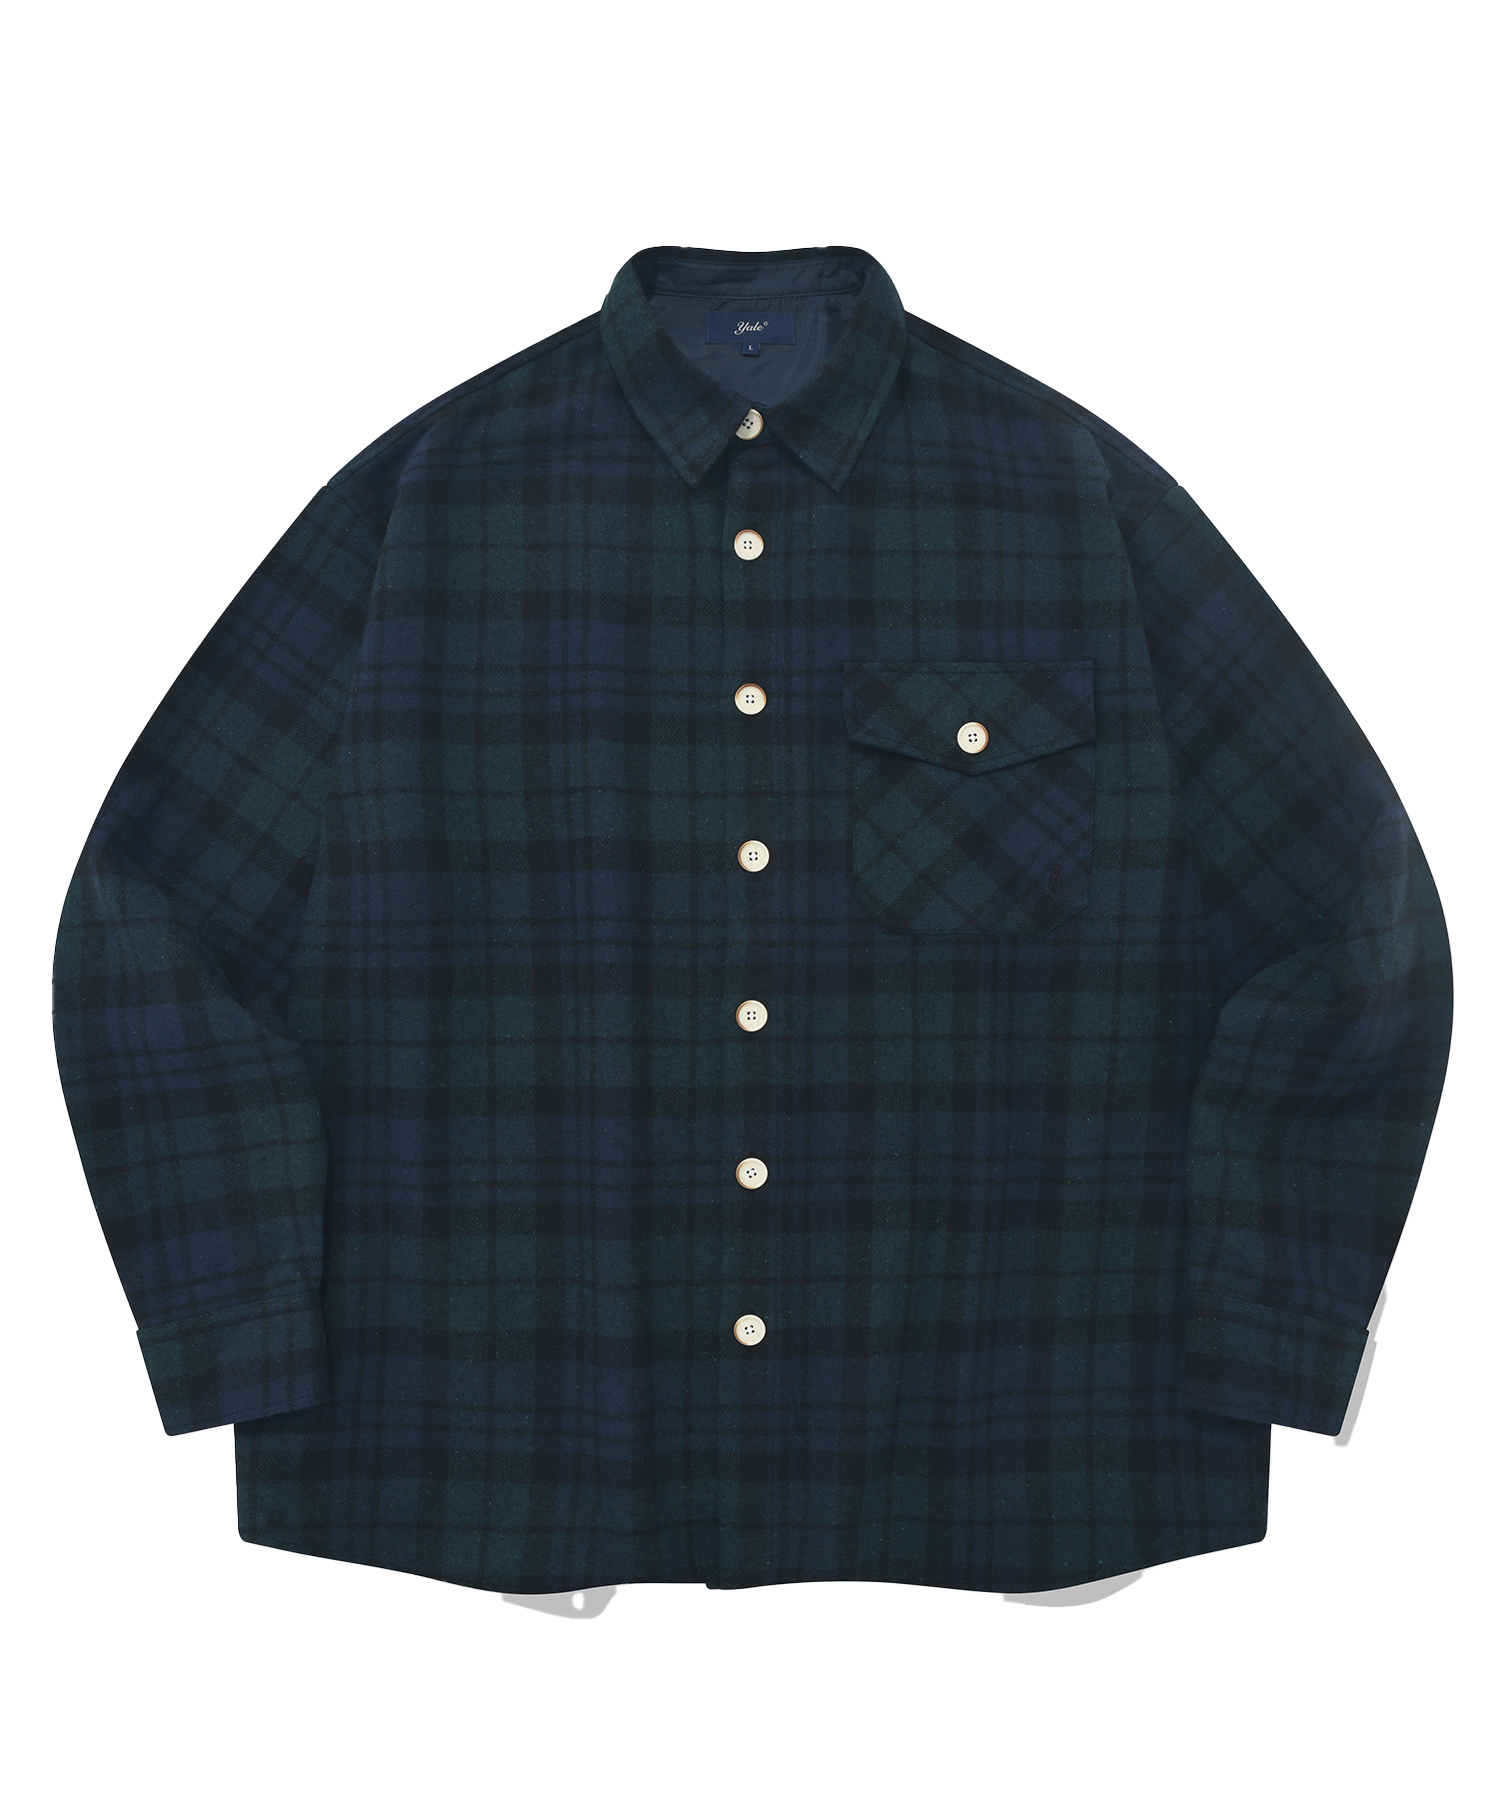 HEAVY FLANNEL ONE POCKET CHECK SHIRTS GREEN